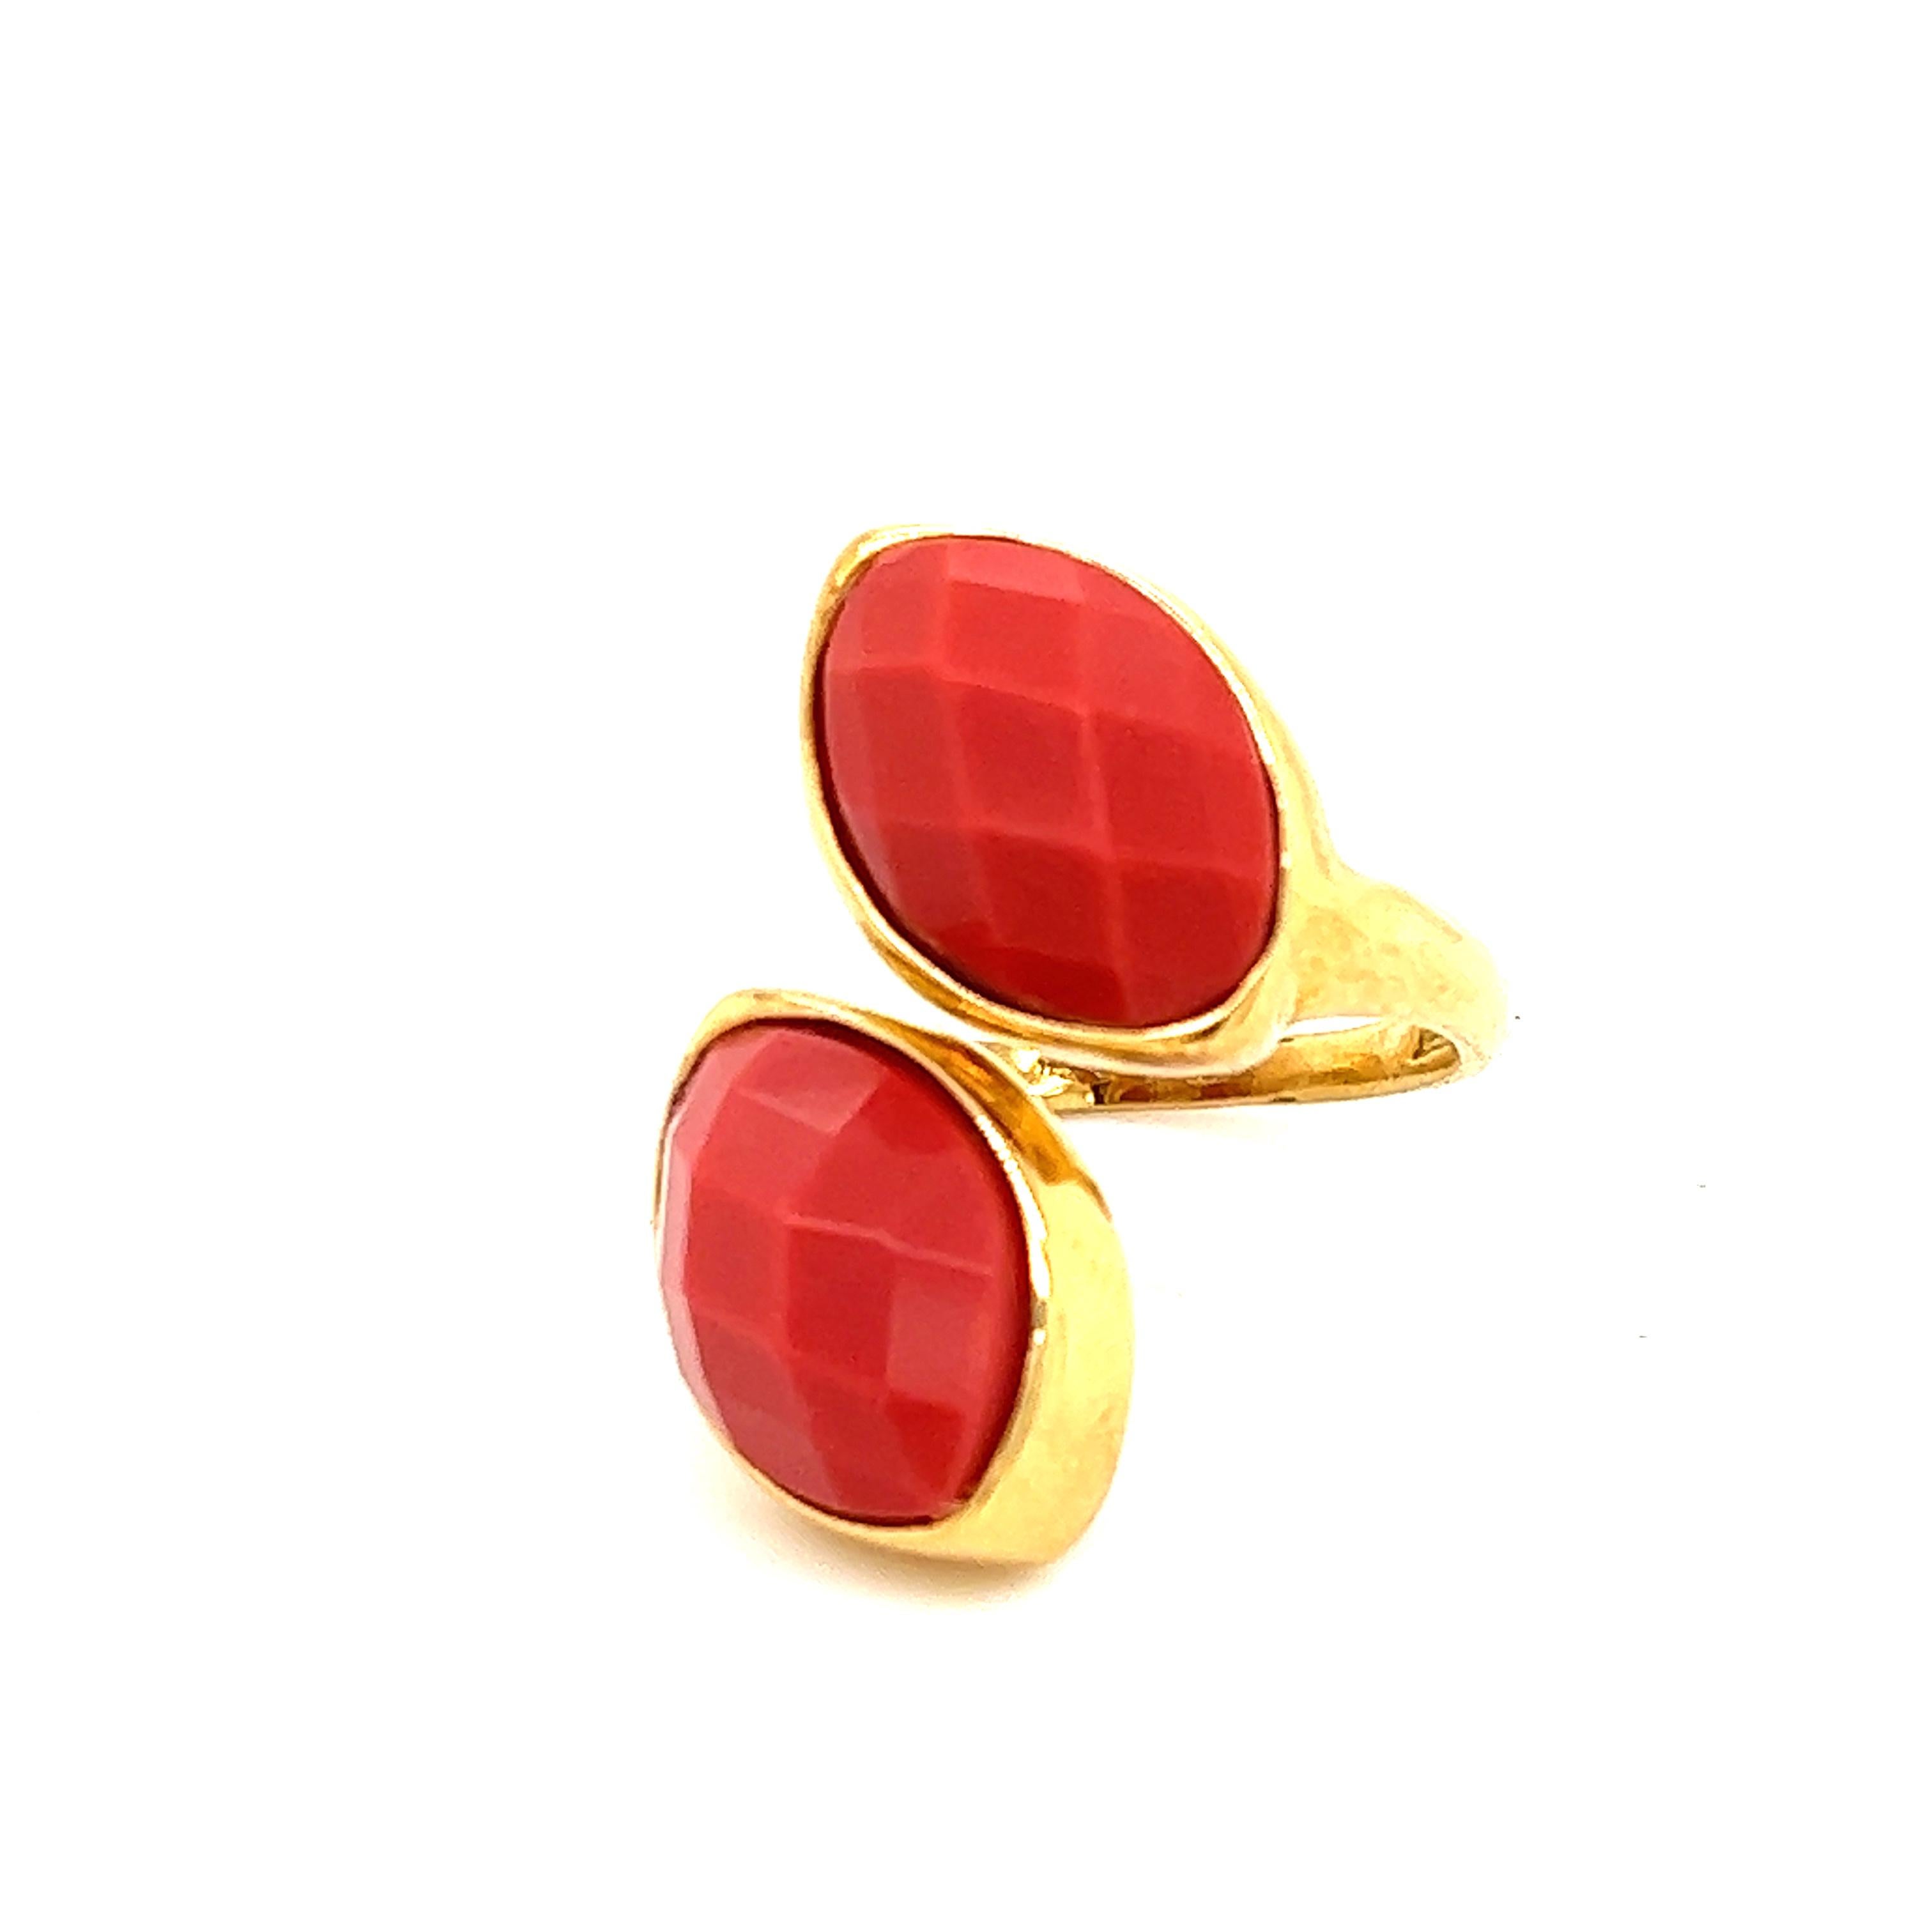 Trendy design seen on this 18k contemporary design. The ring is crafted in 18k gold and is the form of a serpent. The ring is set with two checkerboard cut coral color gemstones. The gemstones are of synthetic variety. The ring is a by-pass design